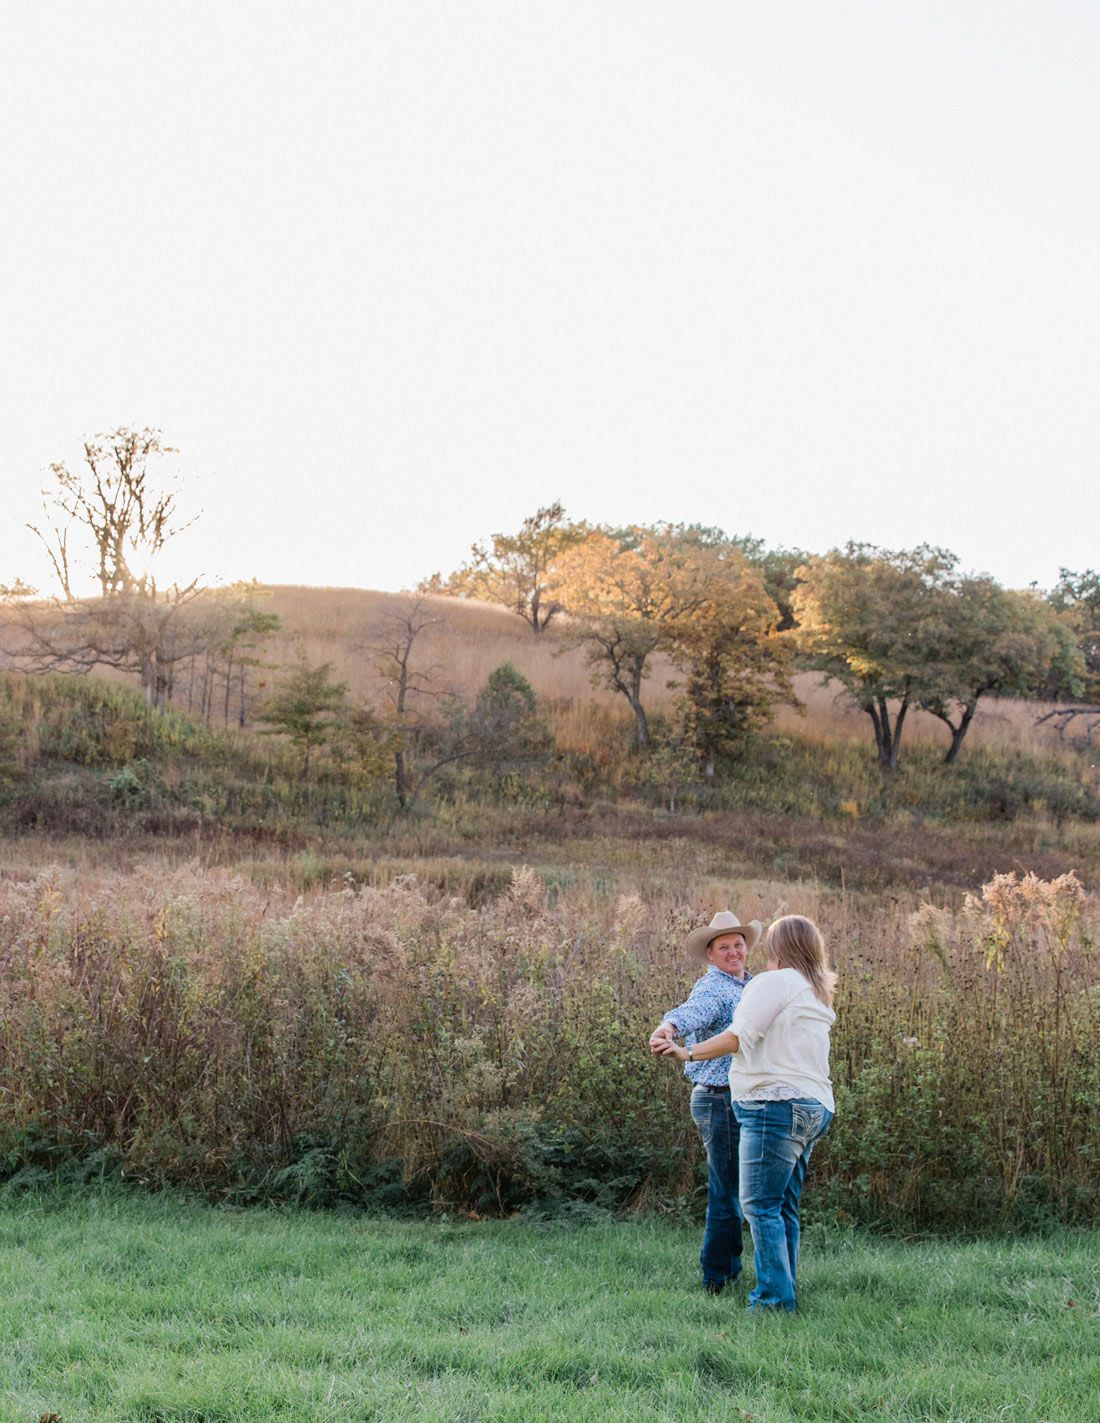 Carrie and Nate dance in the field by the barn.